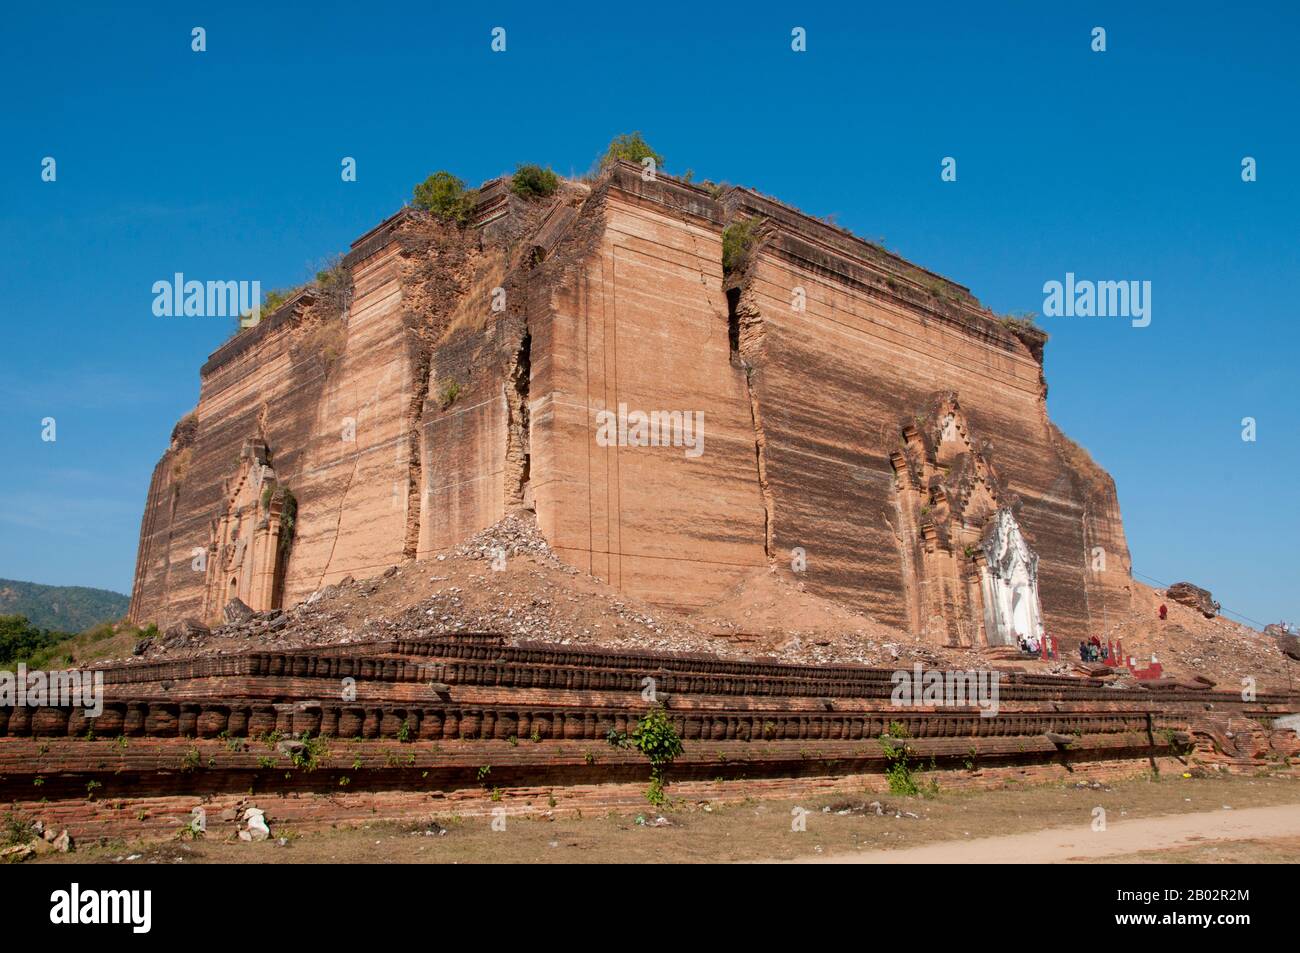 The Mingun Pahtodawgyi (Mingun Temple) was built in 1790 by King Bowdawpaya (1745 - 1819) the sixth king of the Konbaung Dyanasty. The enormous stupa was never completed and today stands at a height of 50m (164 ft). It was originally intended to be the tallest stupa in the world at a height of 150m (490 ft). Stock Photo